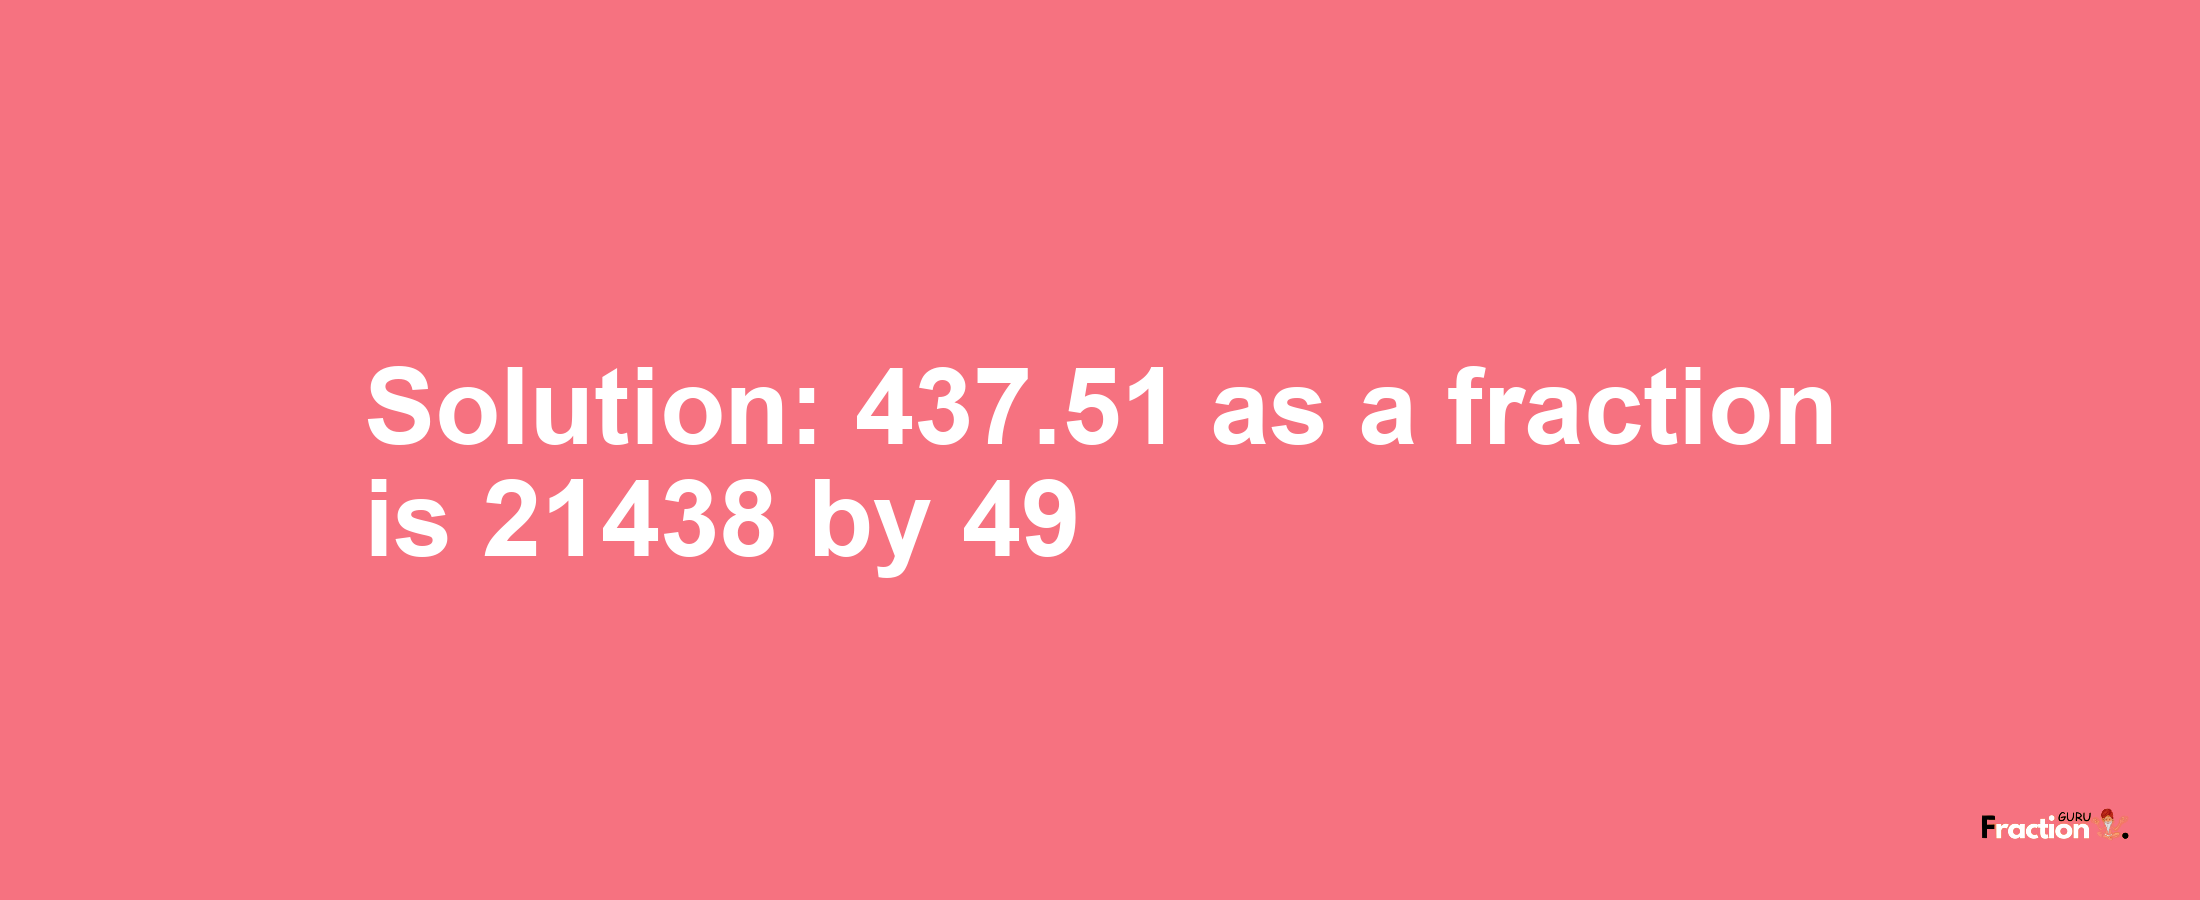 Solution:437.51 as a fraction is 21438/49